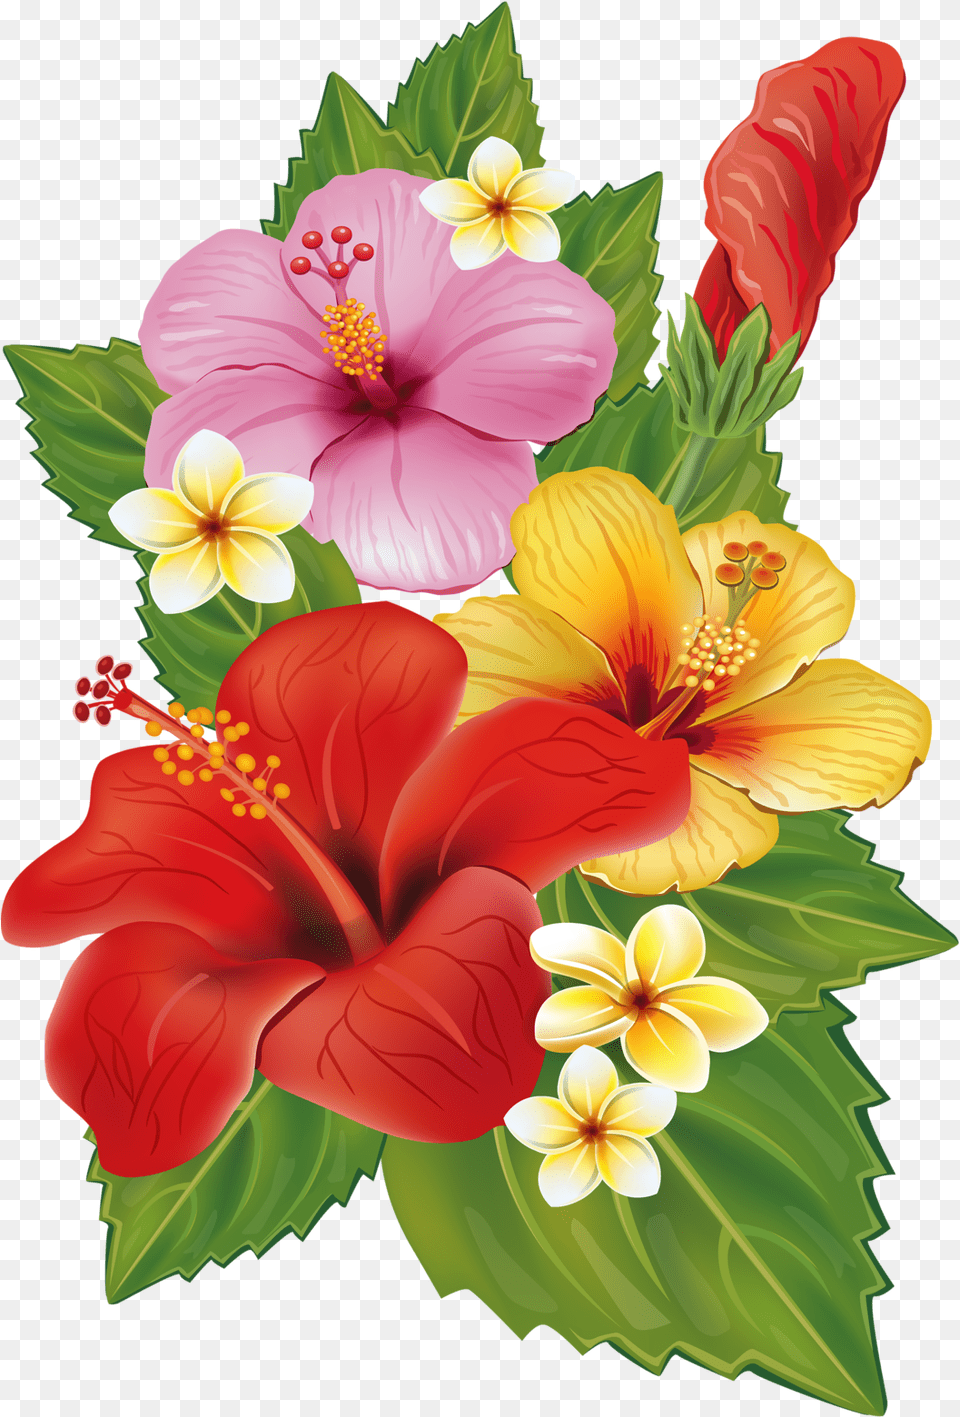 Hawaii Clipart Plumeria Hawaiian Tropical Flowers Background, Flower, Plant, Hibiscus, Anther Png Image